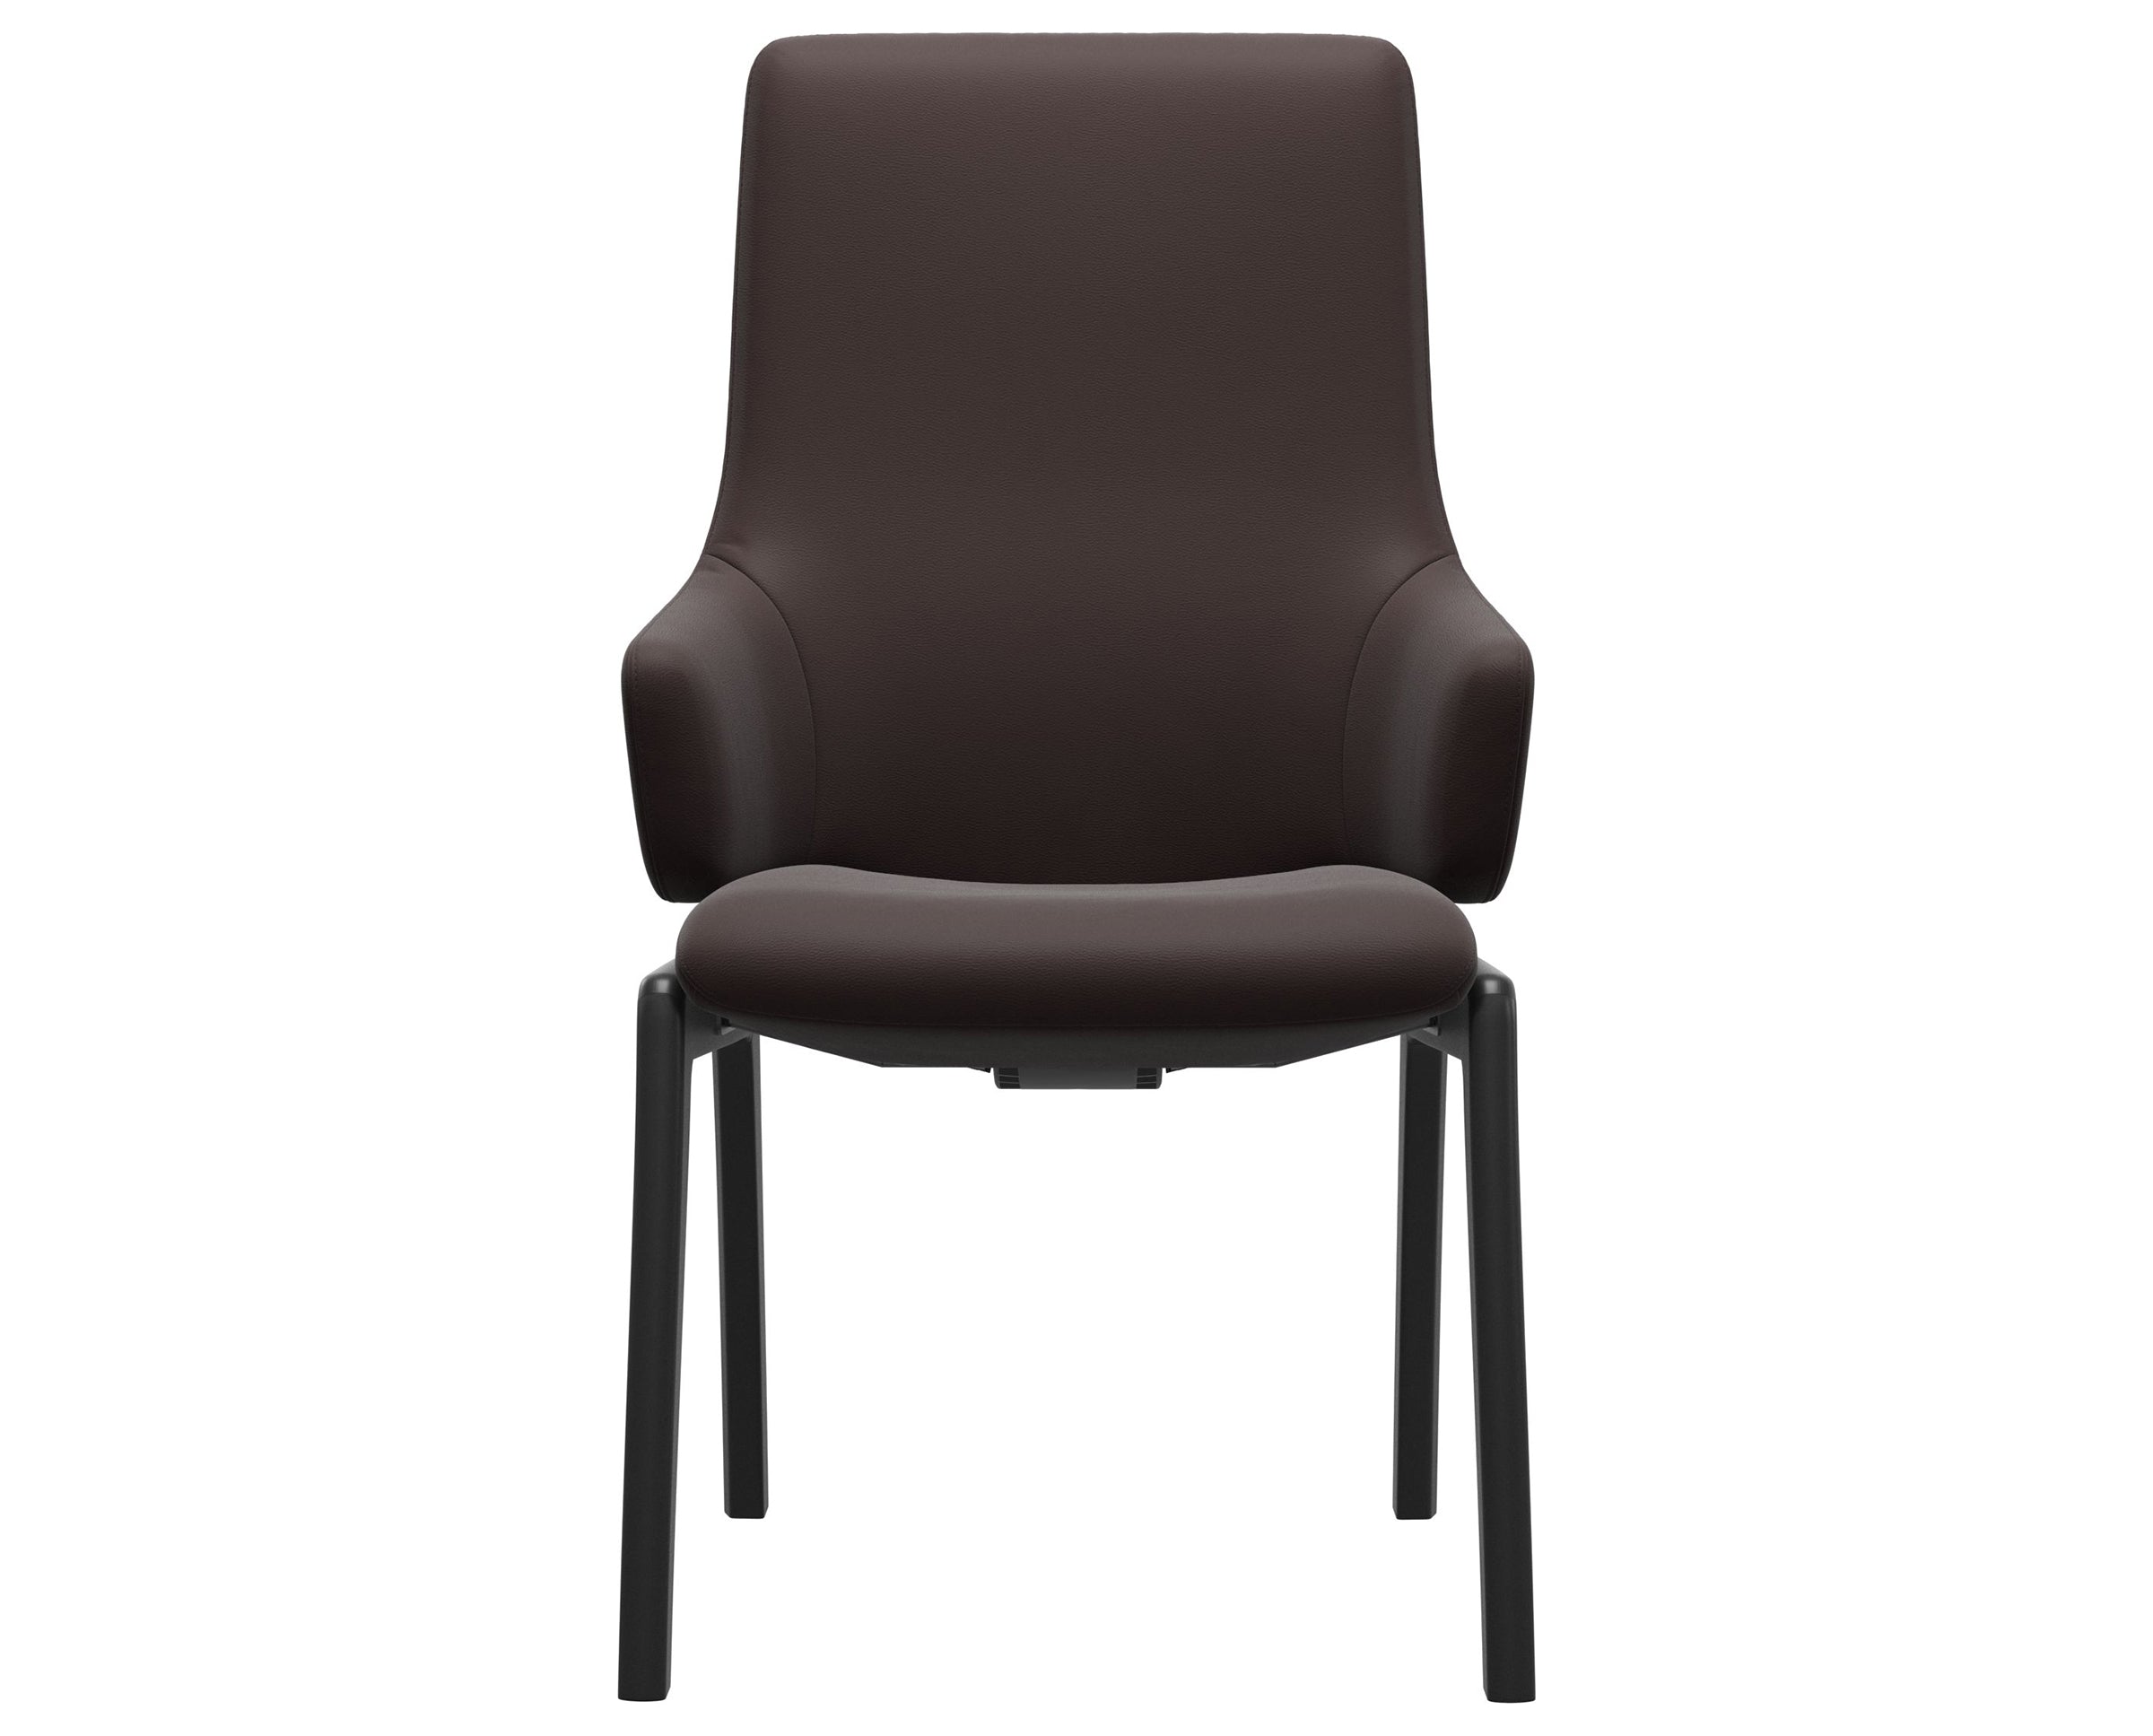 Paloma Leather Chocolate and Black Base | Stressless Laurel High Back D100 Dining Chair w/Arms | Valley Ridge Furniture